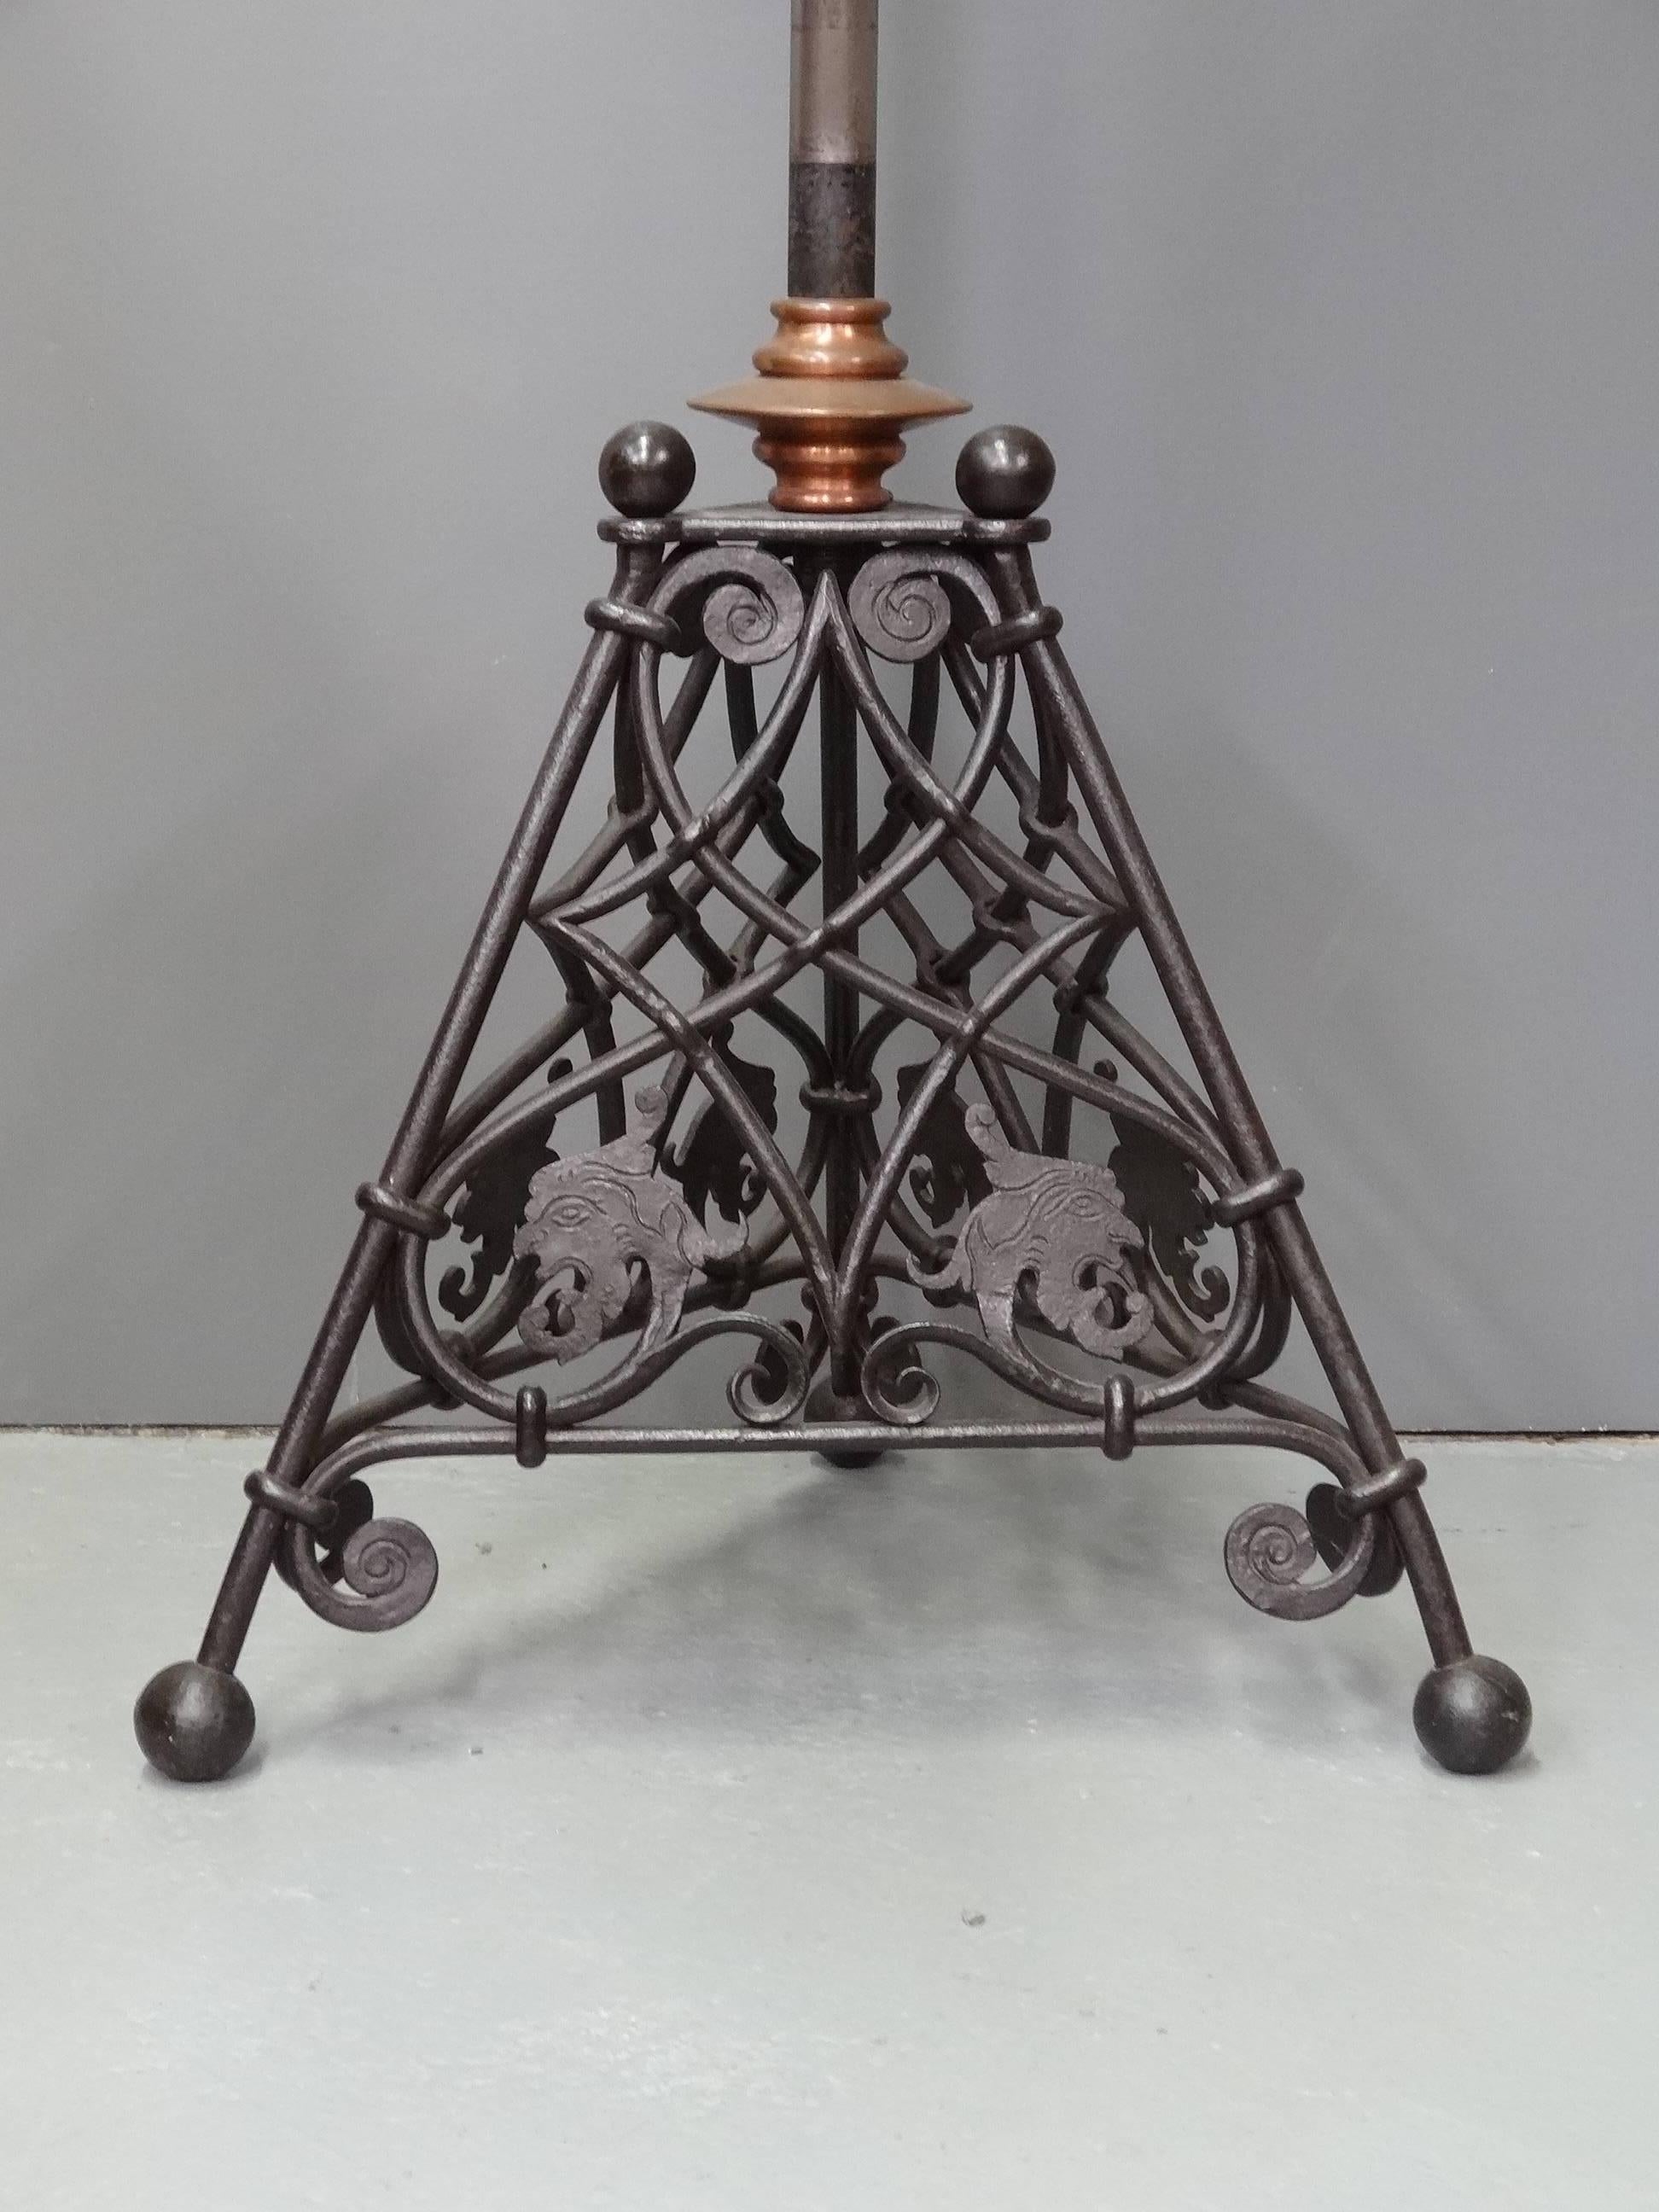 A rare wrought iron, steel and copper, Arts & Crafts extendable standard lamp, circa 1900; probably made by Thomas Elsley or W Bainbridge Reynolds, to a design strongly attributable to, the British architect-designer, CFA Voysey (1857-1941). 
